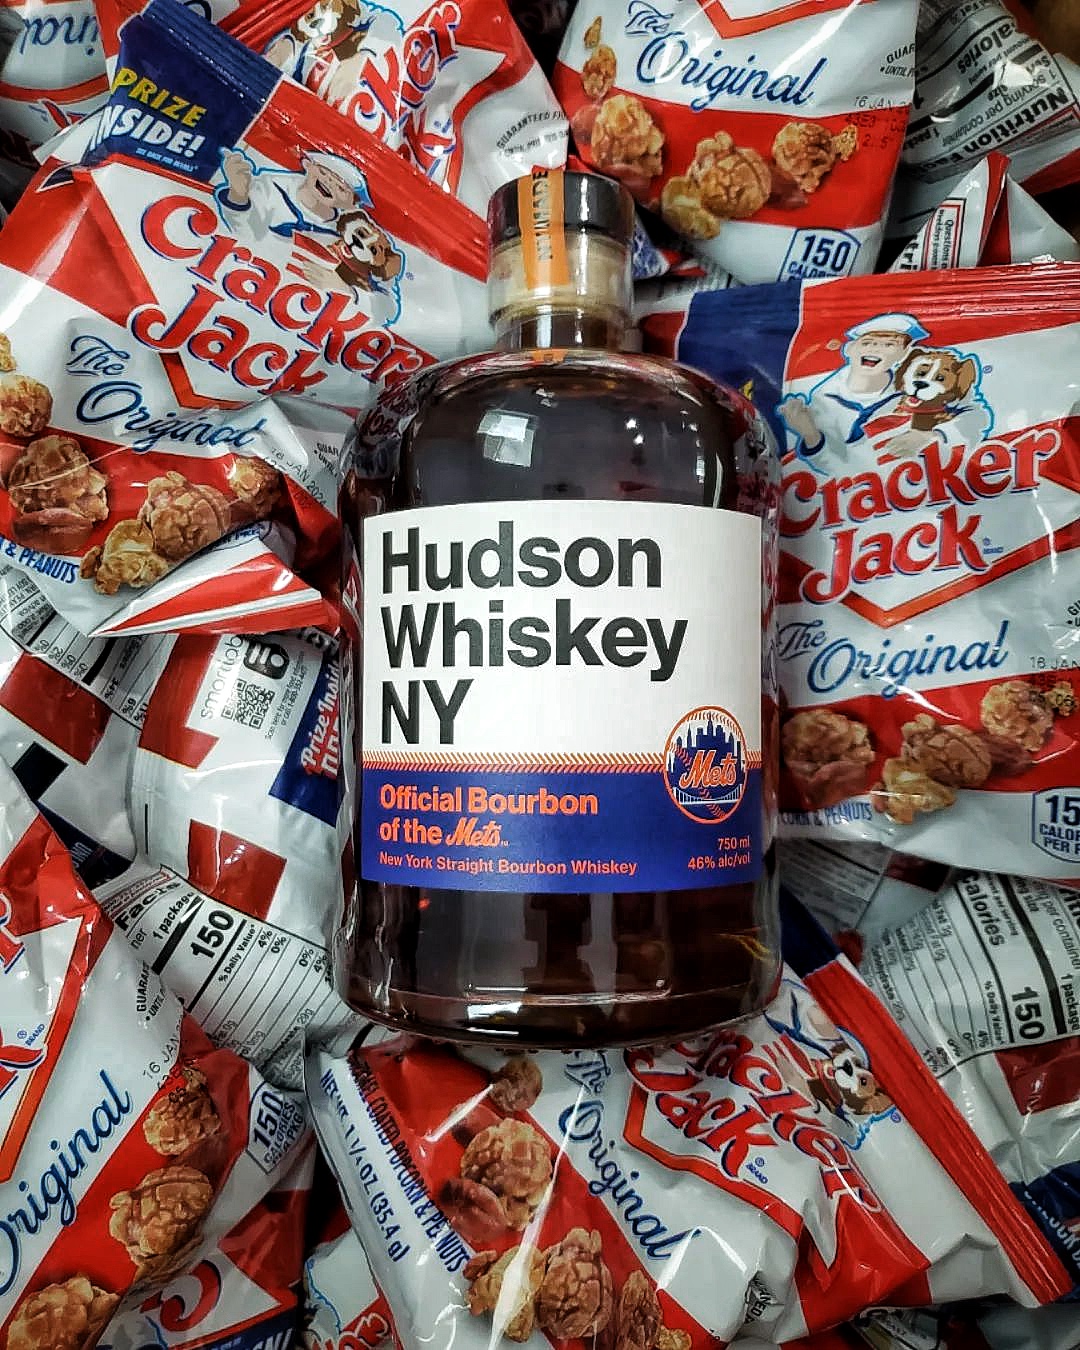 New York Mets Announce Official Bourbon from Hudson Whiskey